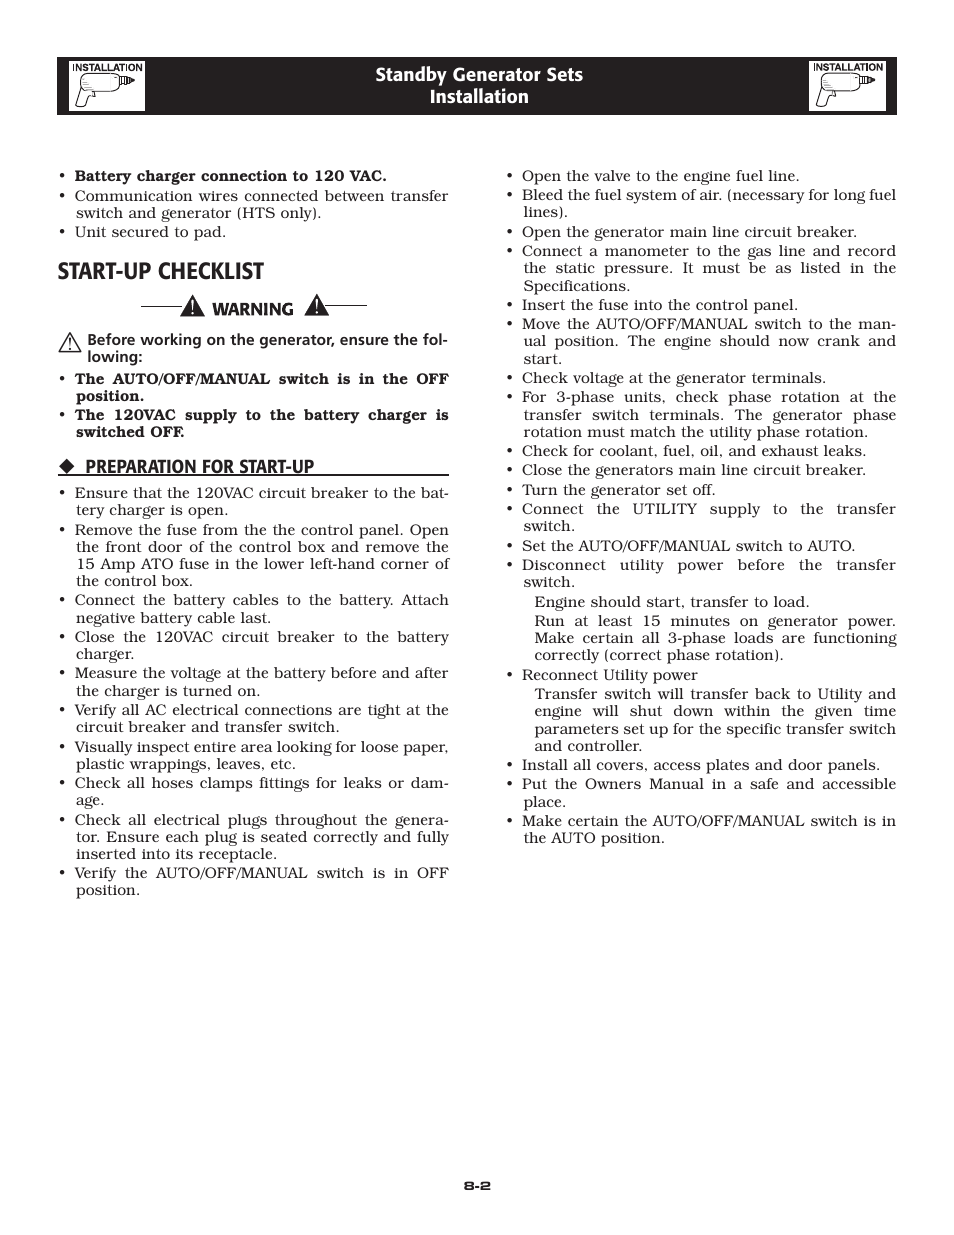 Start-up checklist | LG 30kW User Manual | Page 14 / 60